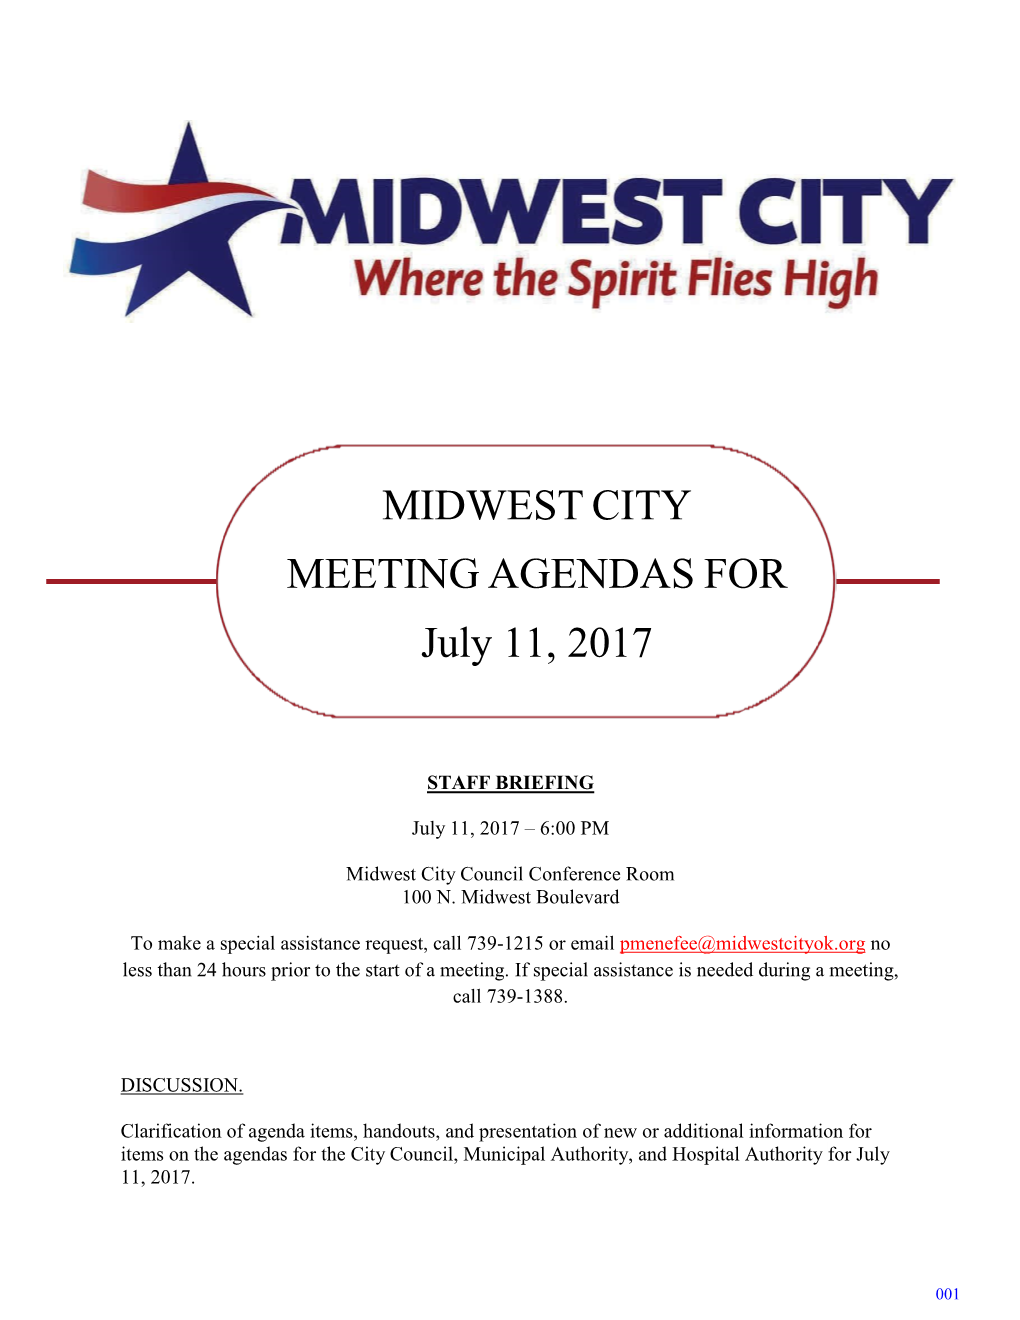 MIDWEST CITY MEETING AGENDAS for July 11, 2017